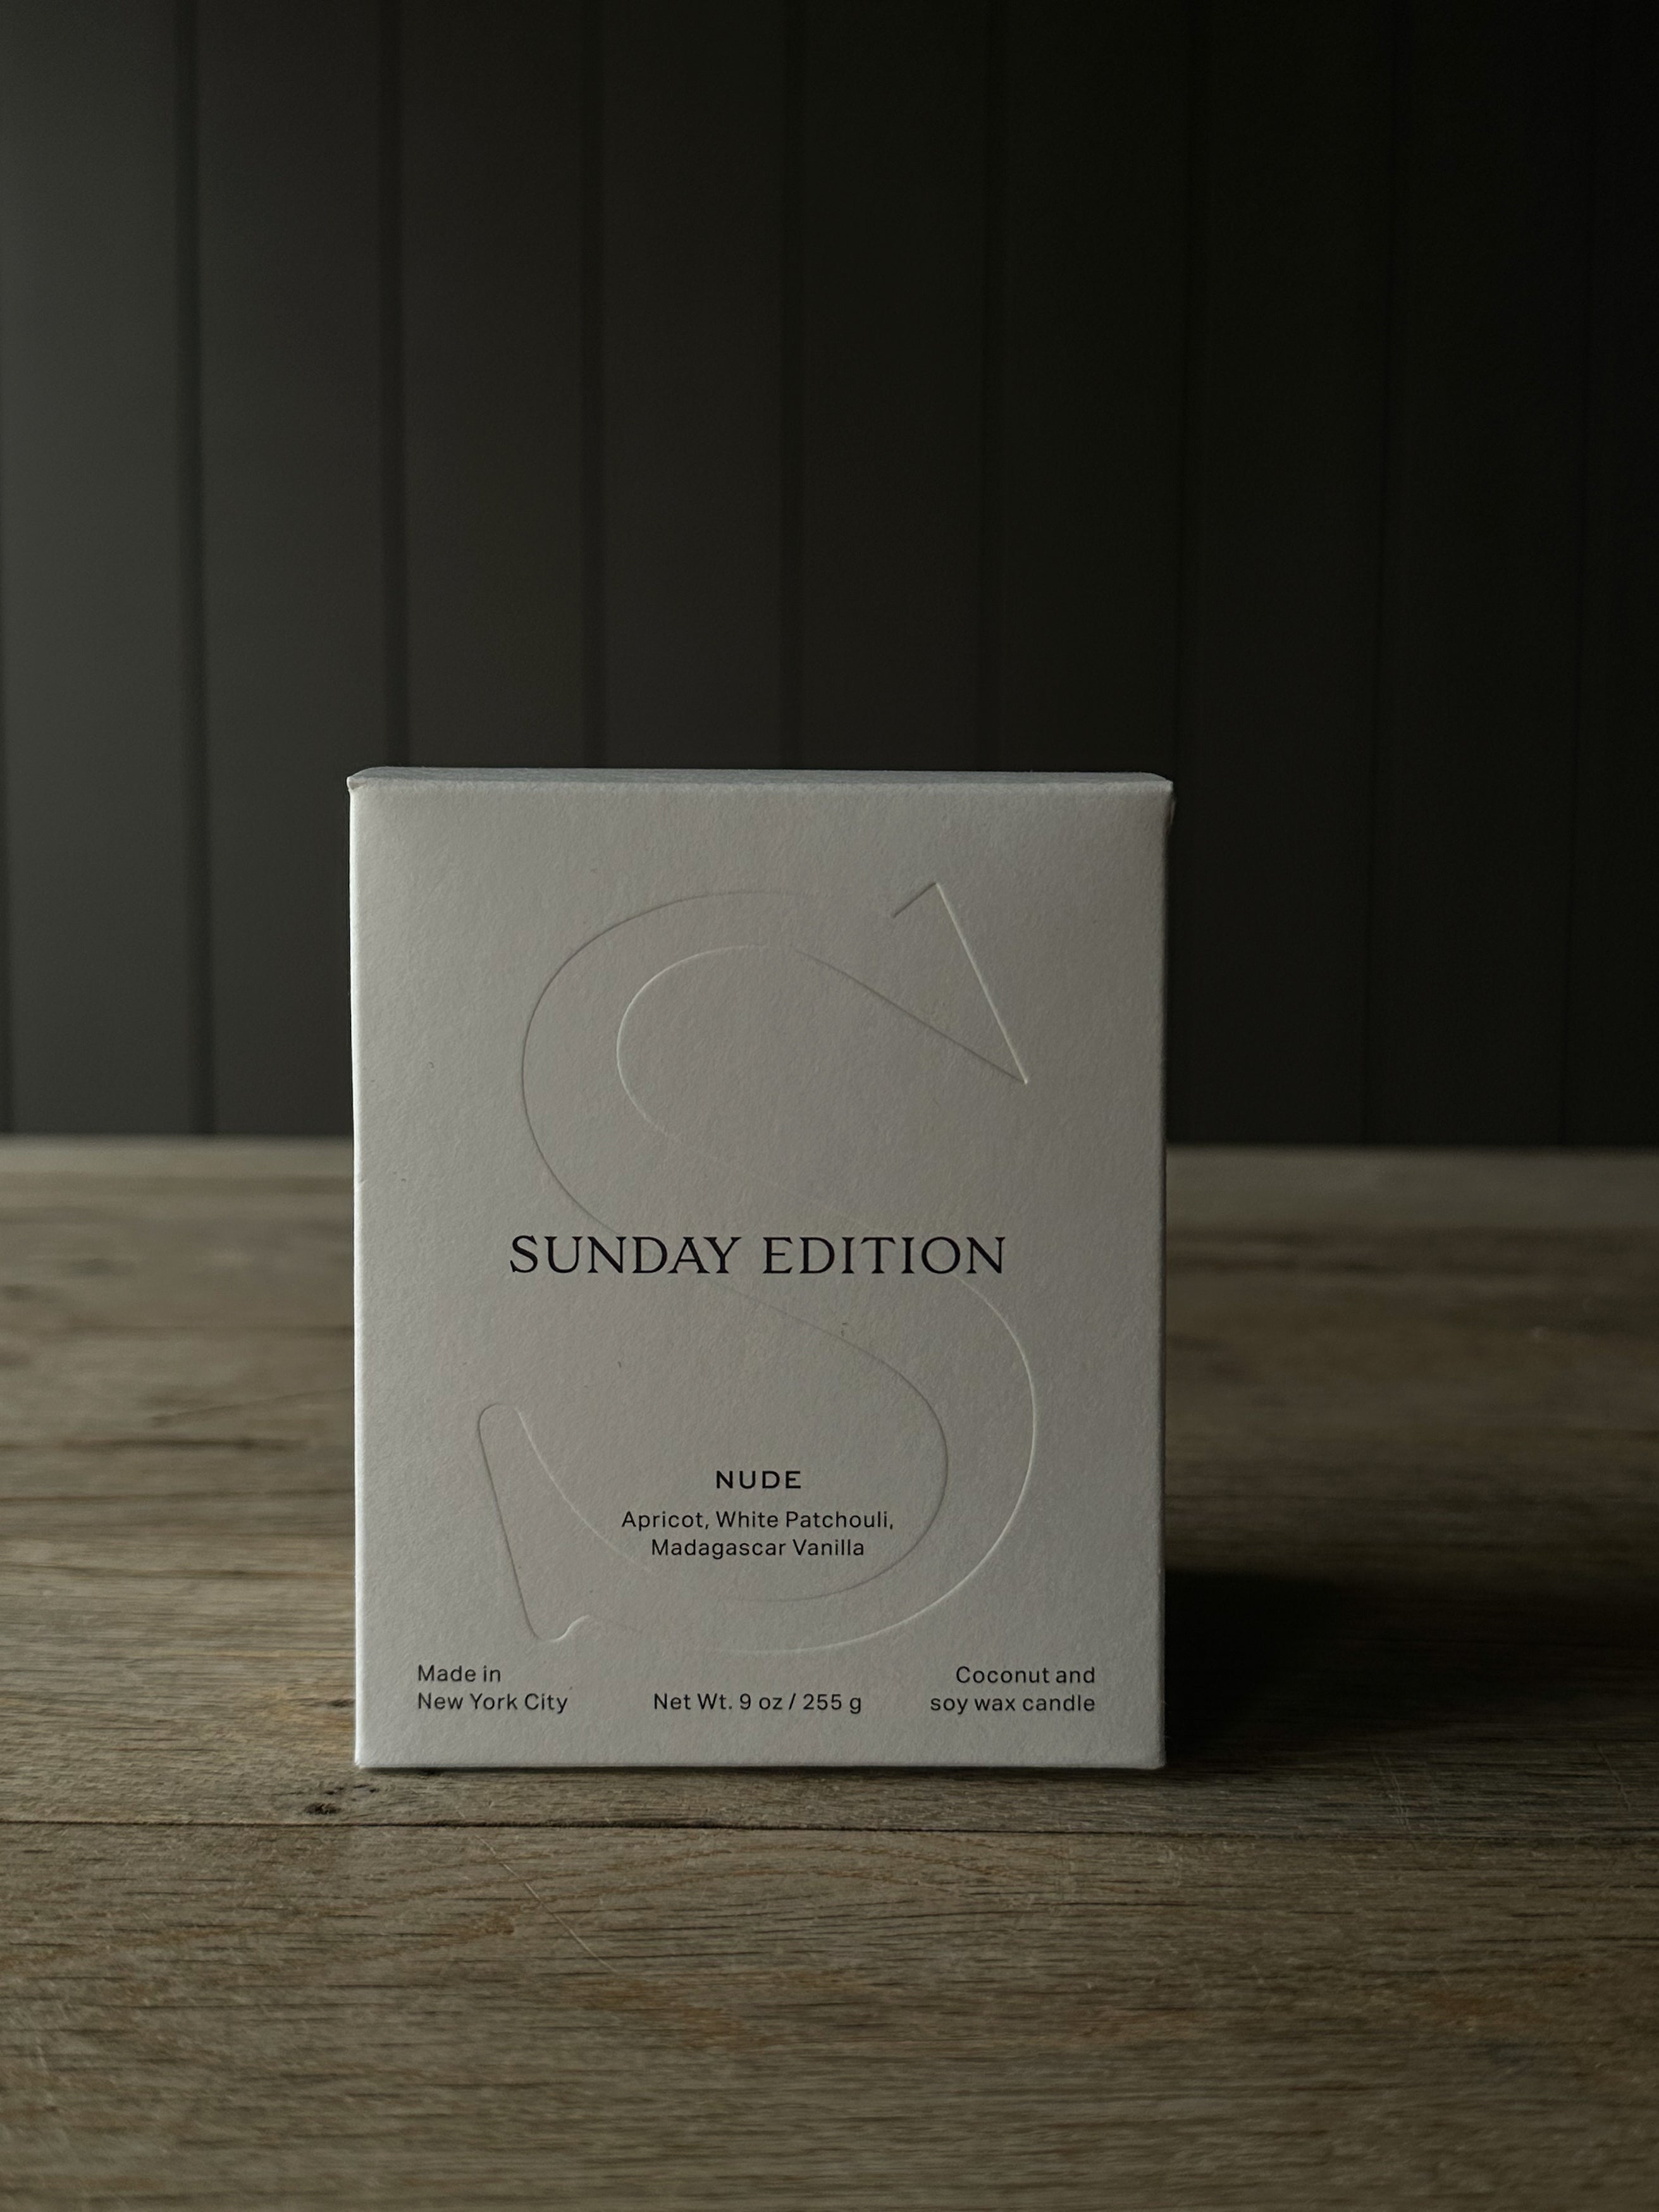 The Nude Candle by Sunday Edition